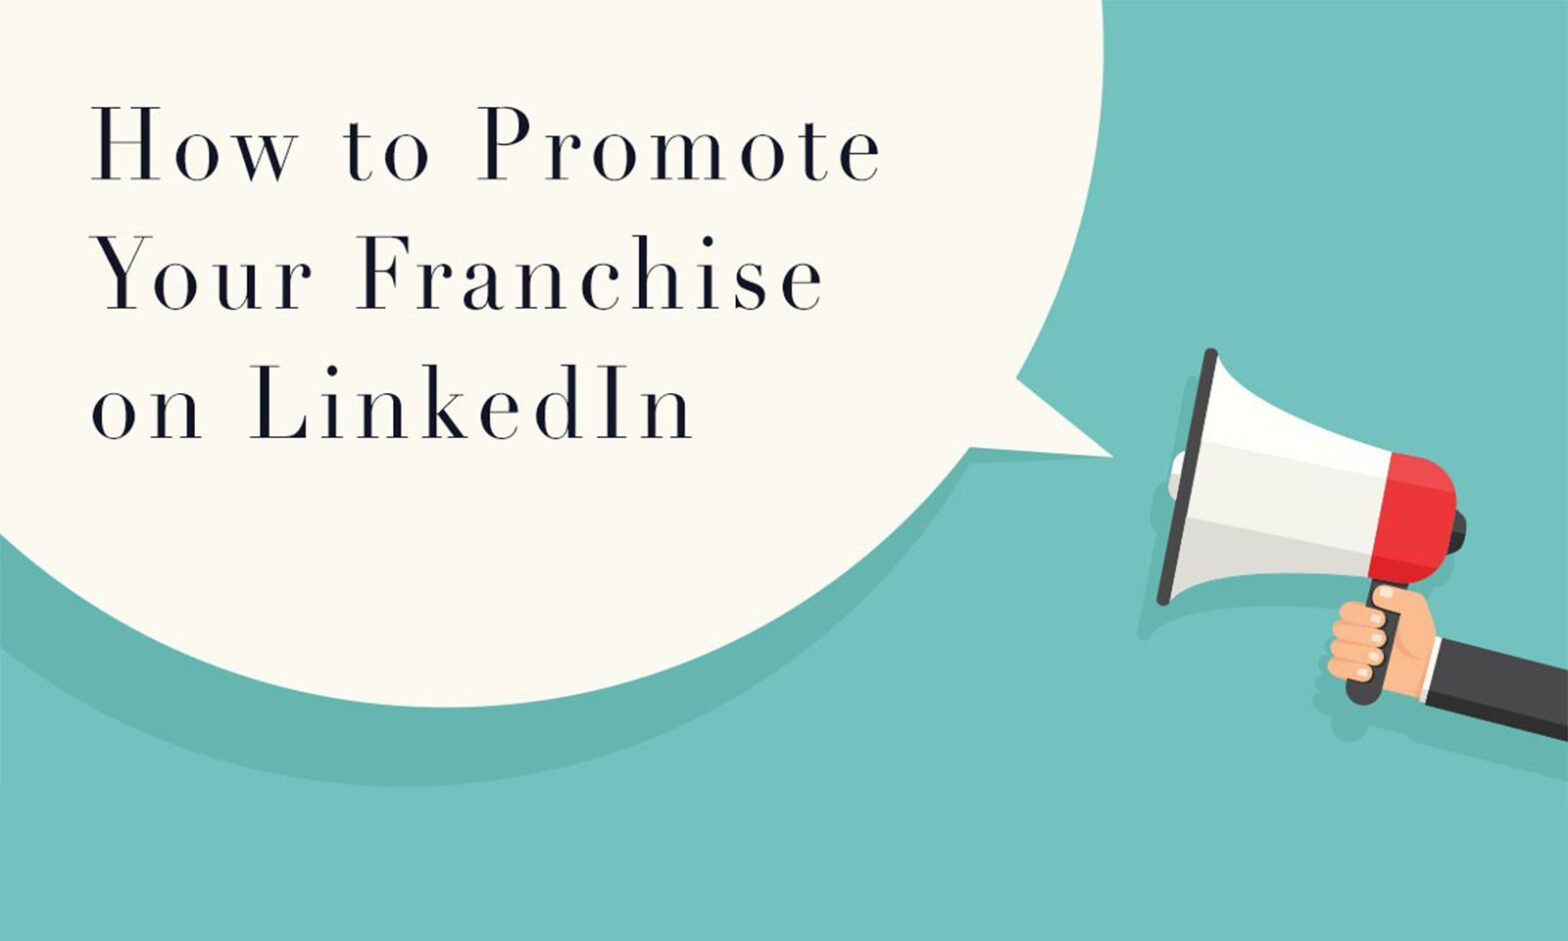 How to Promote Your Franchise on LinkedIn